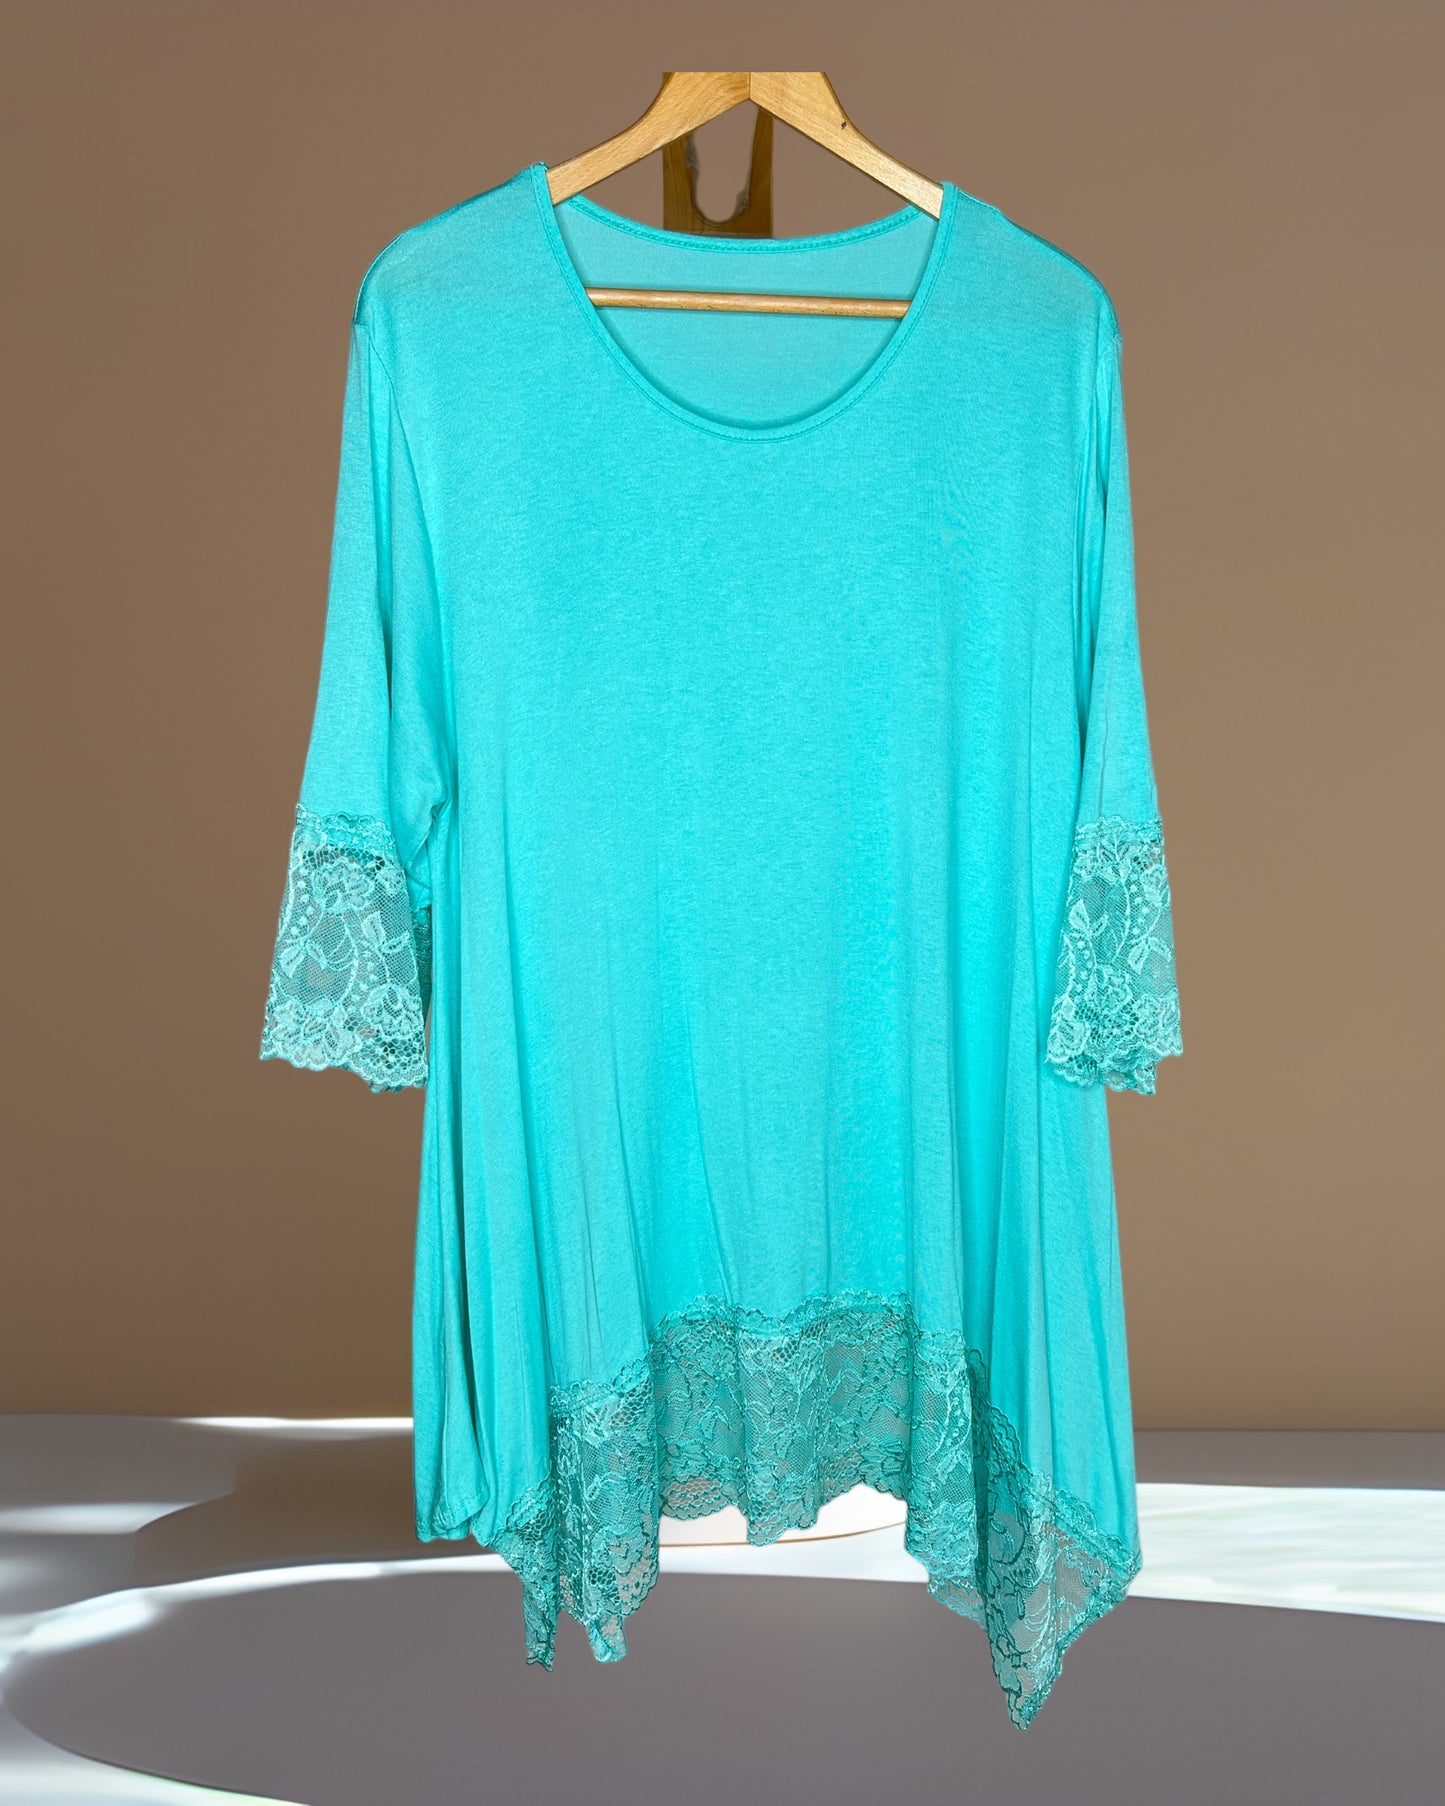 CINDY - TOP TURQUOISE TAILLE 46 A 56/58